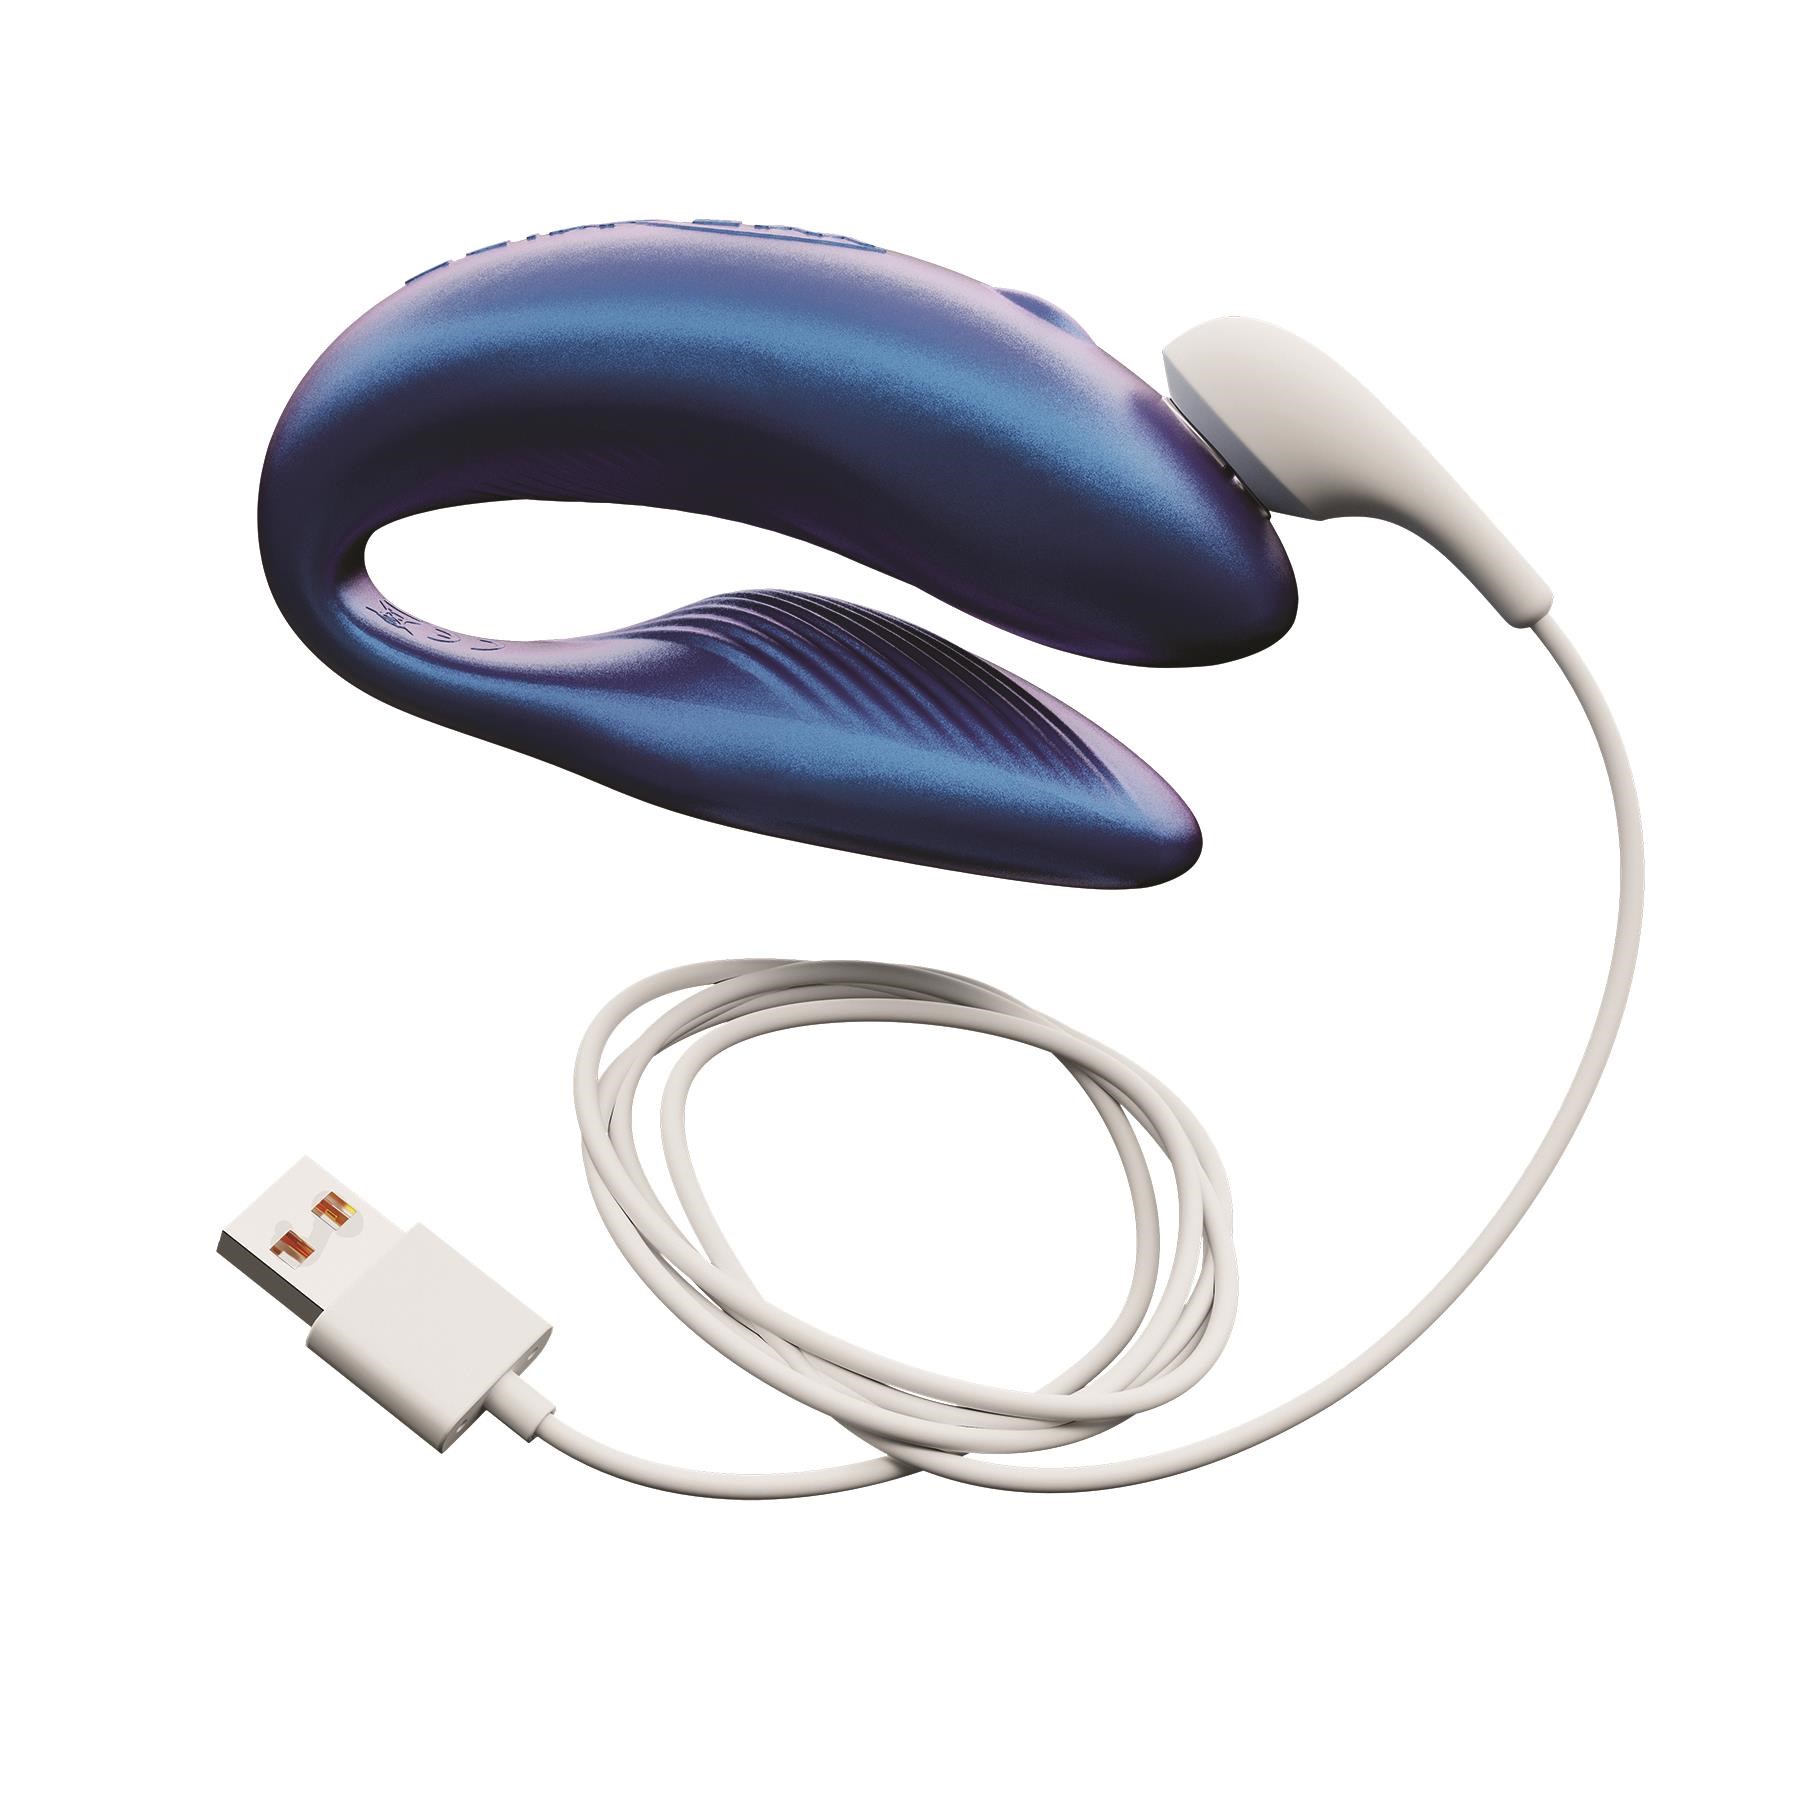 We-Vibe Chorus Couples Massager - Vibe Showing Where Charging Cable is Placed